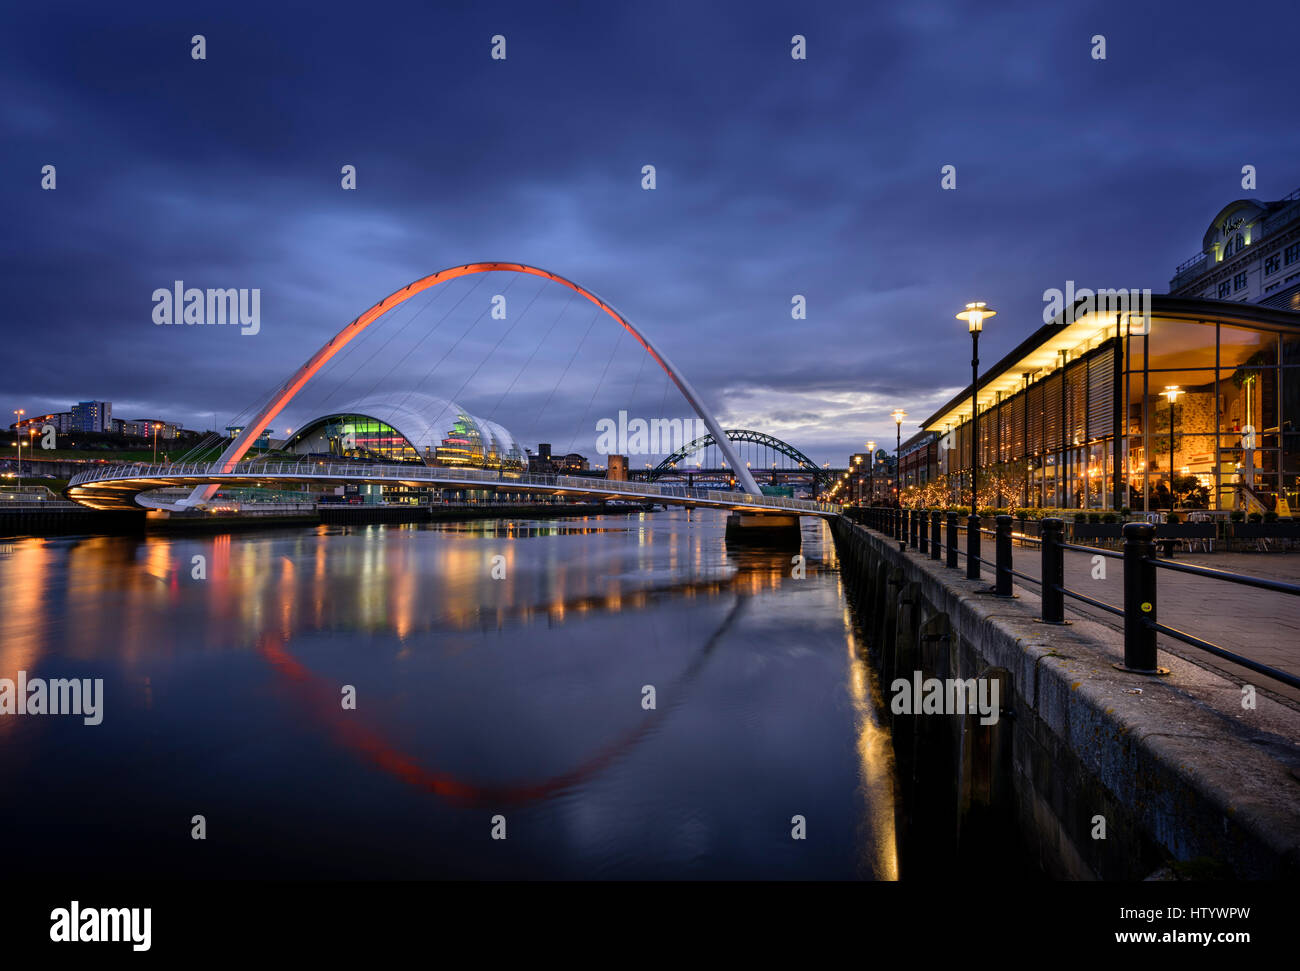 Newcastle upon Tyne in Tyneside, Tyne and Wear in North East England  Newcastle Quayside is known for nightlife architecture and river bridges Stock Photo